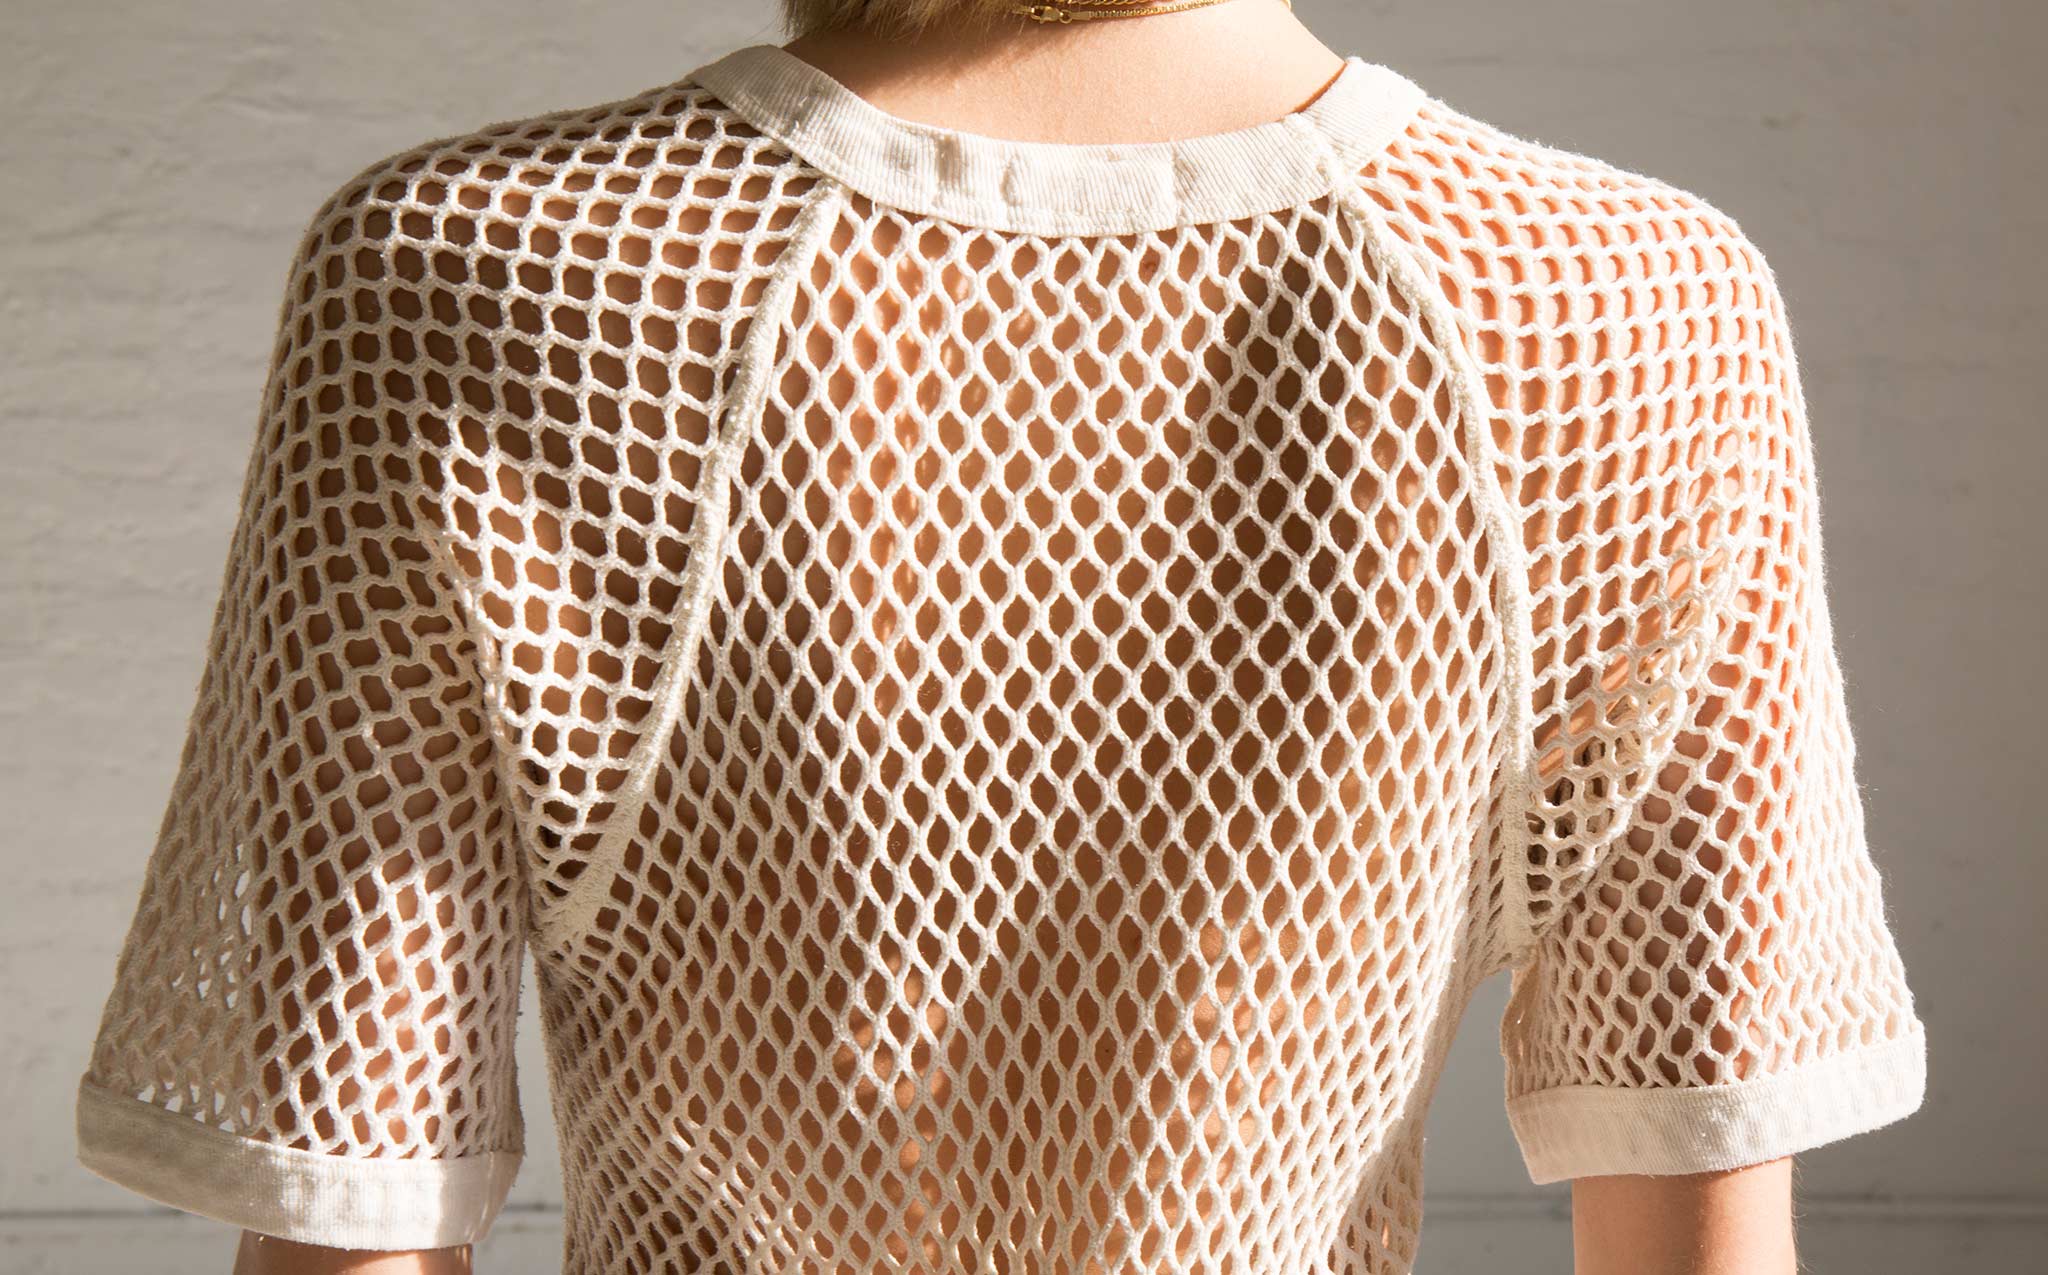 Vintage Net Cover-up